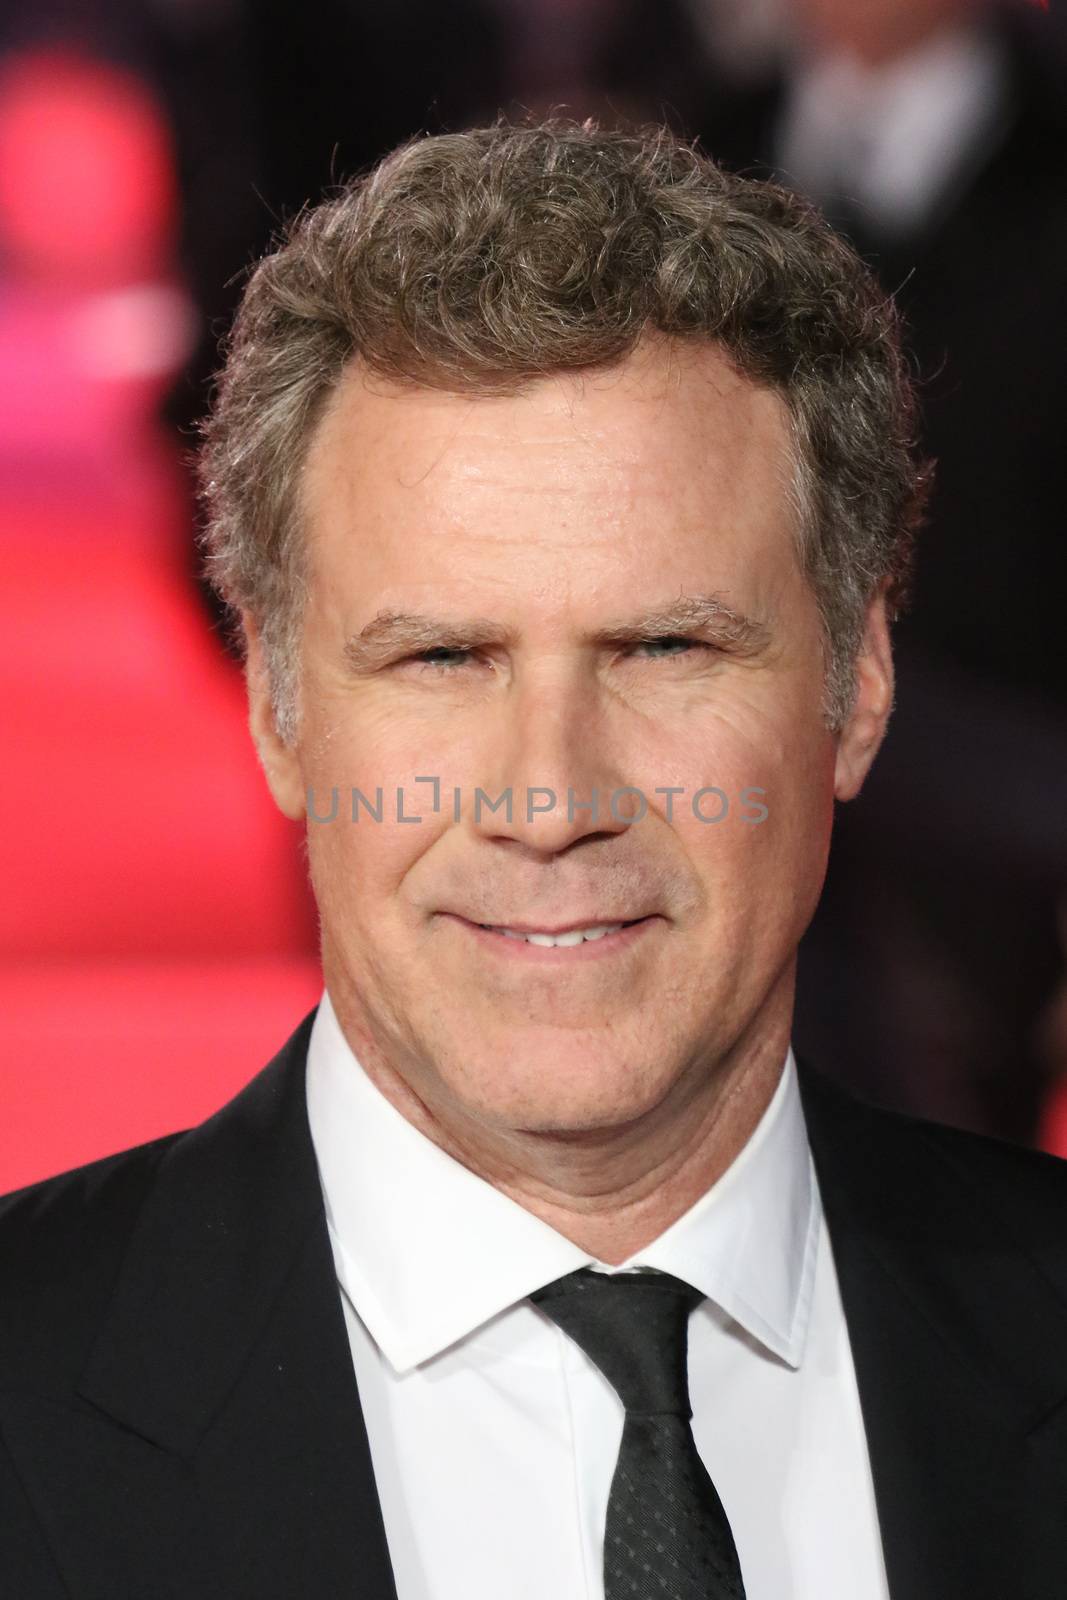 UK, London: Will Ferrell hits the red carpet at Leicester Square in London on December 9, 2015 for the premiere of his new film, Daddy's Home.